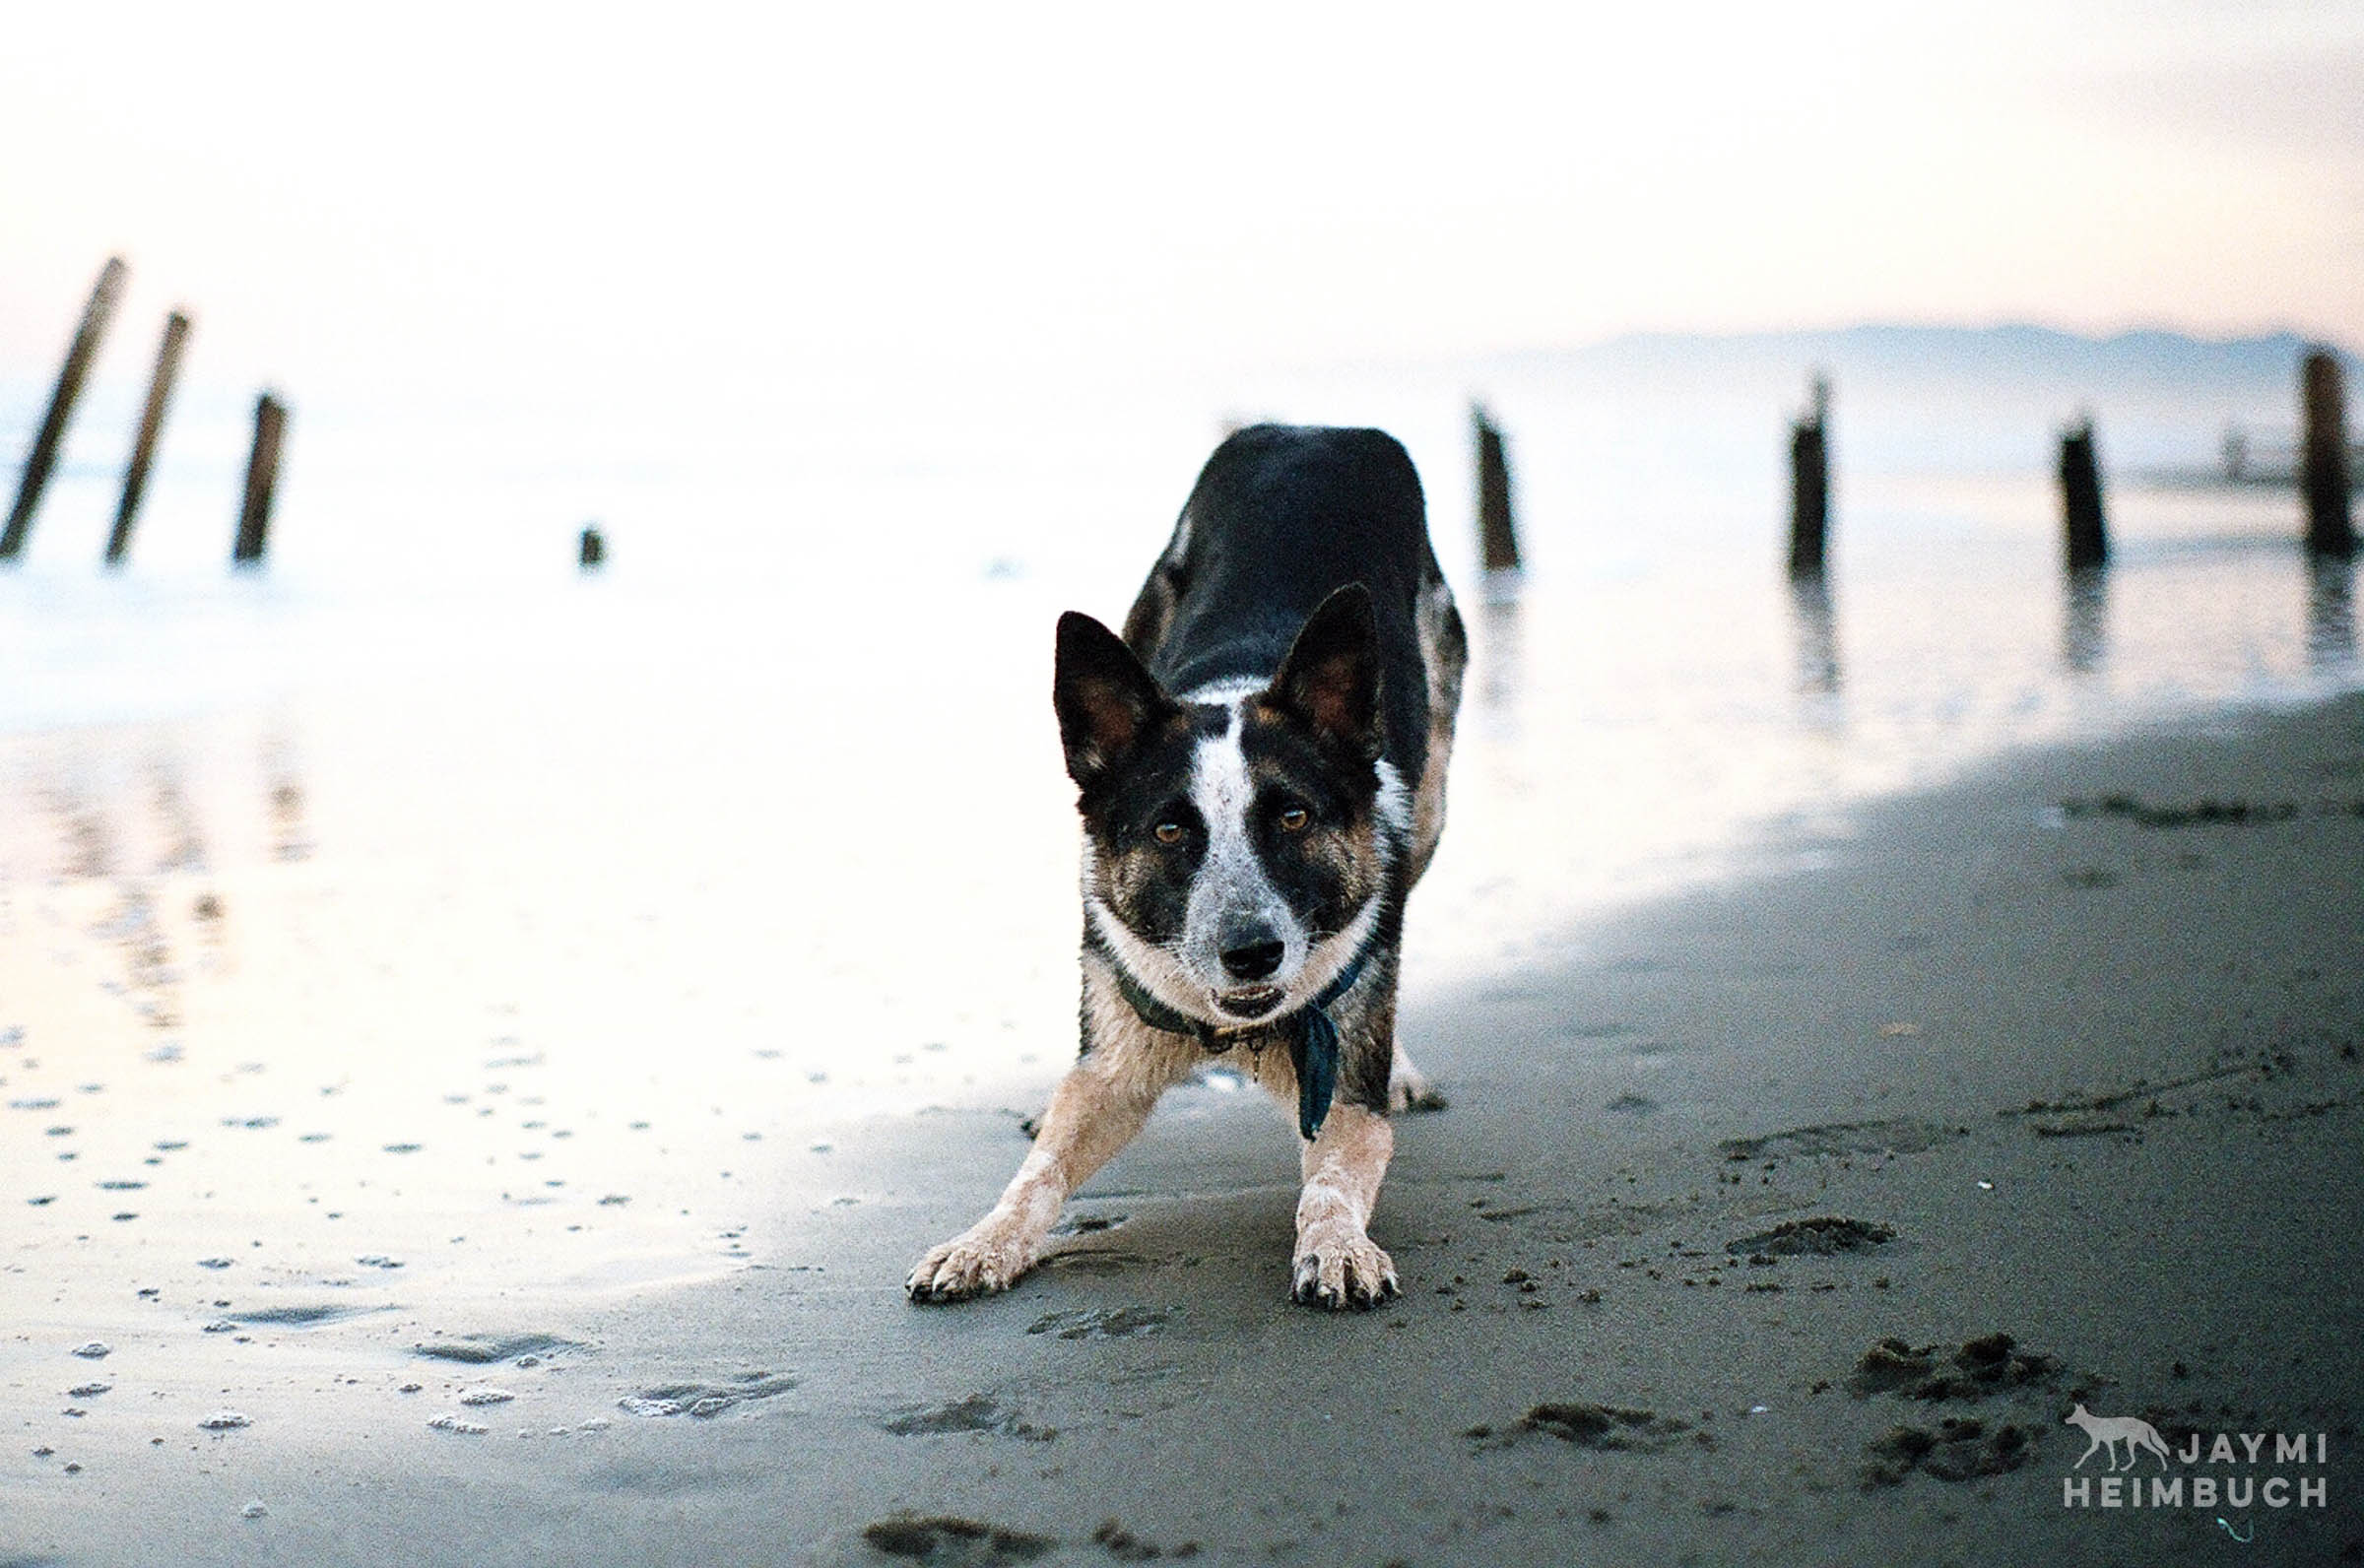 35mm film photo of a dog